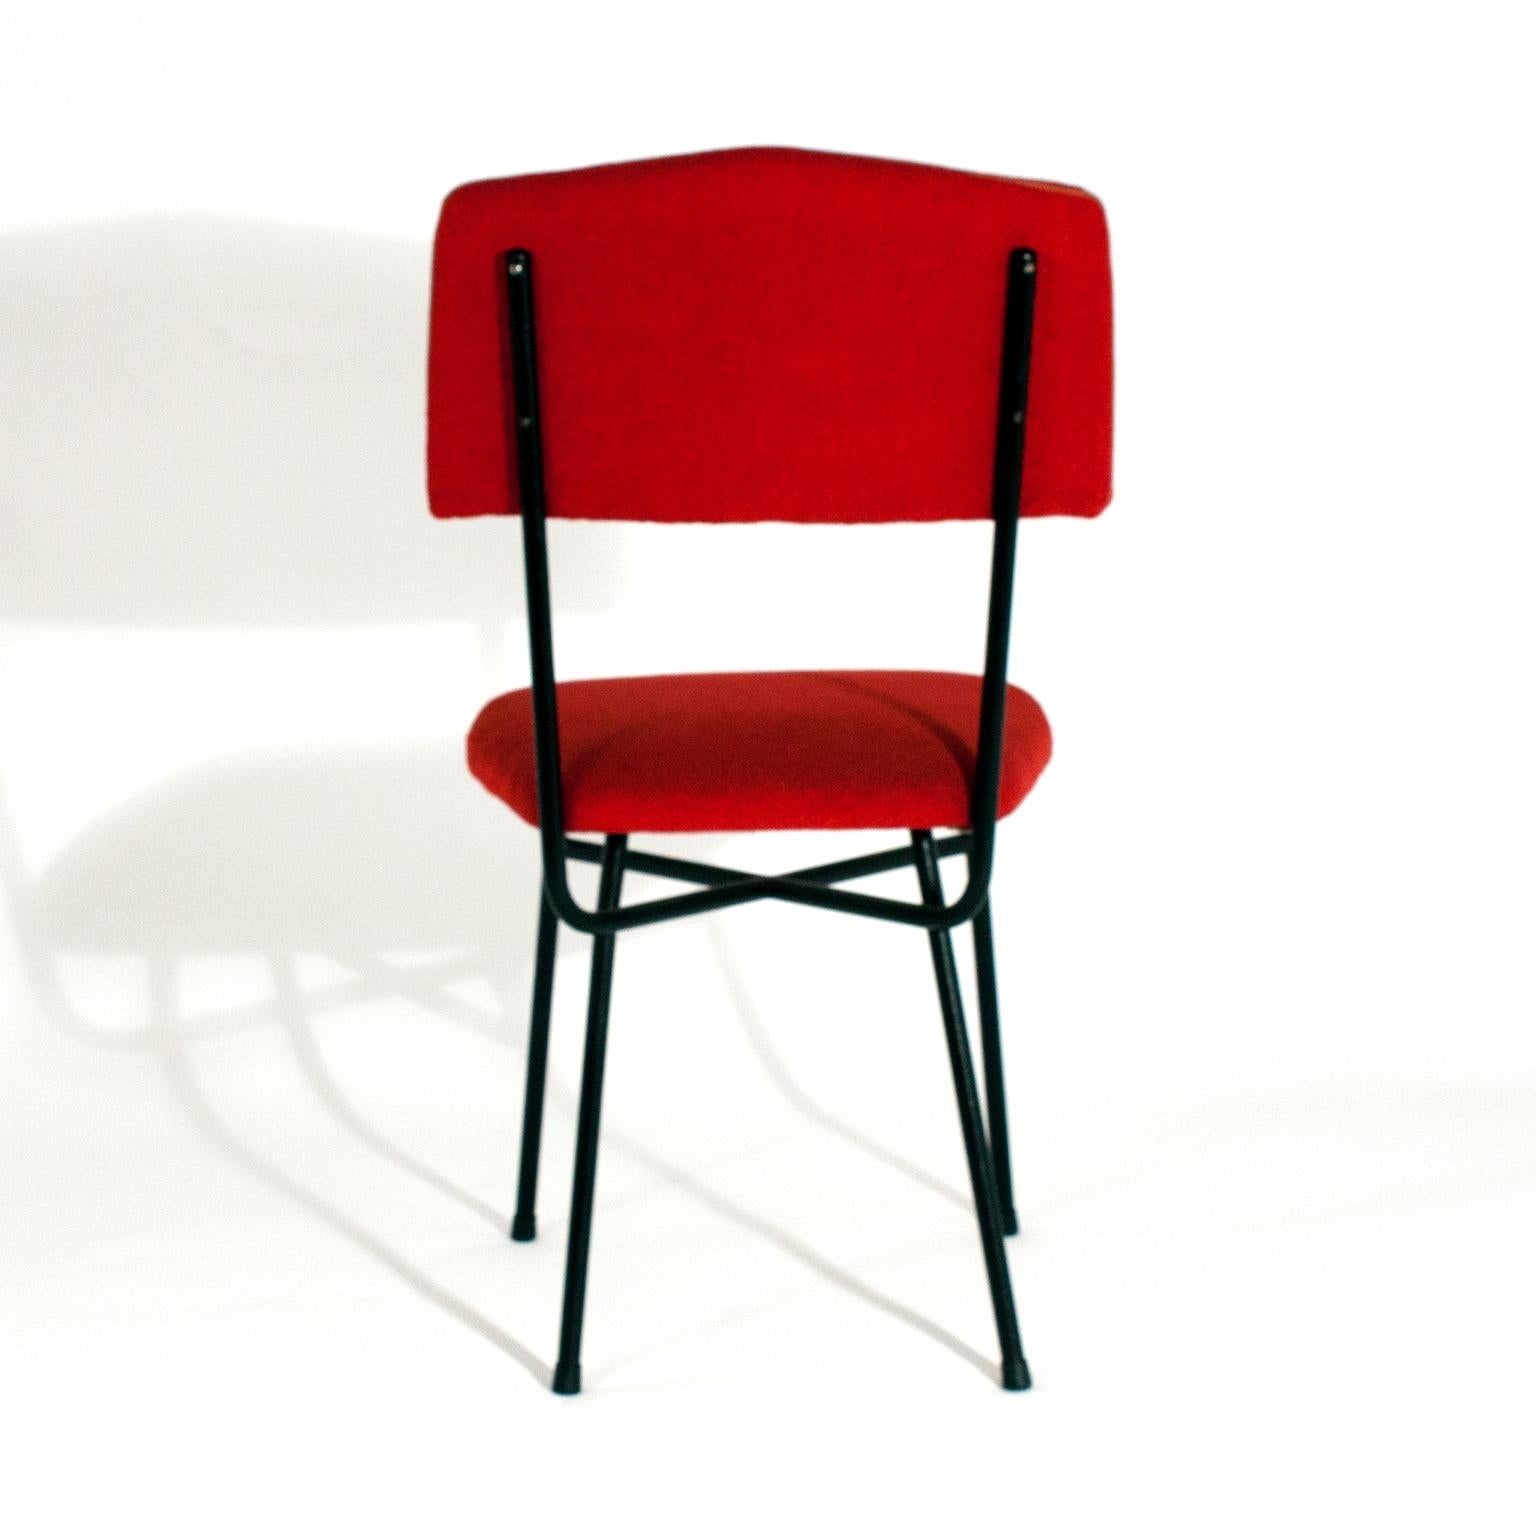 Mid-20th Century Set of Four Italian Chairs, Italy, 1950s, Iron and Red Fabric